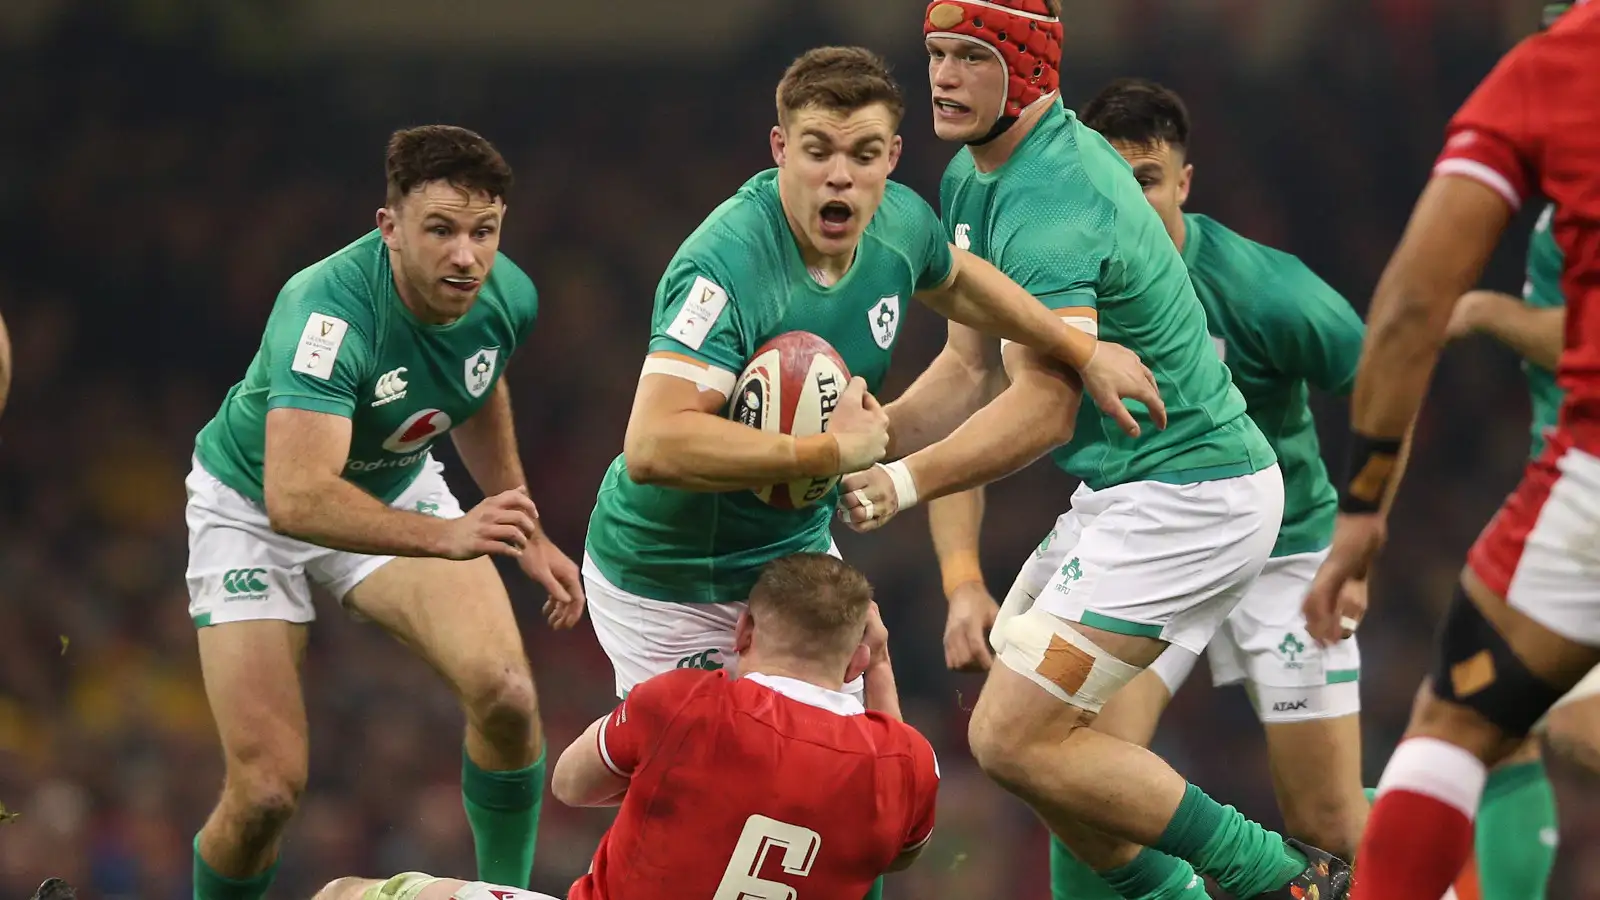 Ireland centre Garry Ringrose has dismissed any Grand Slam talk ahead of the Six Nations showdown with France this weekend.